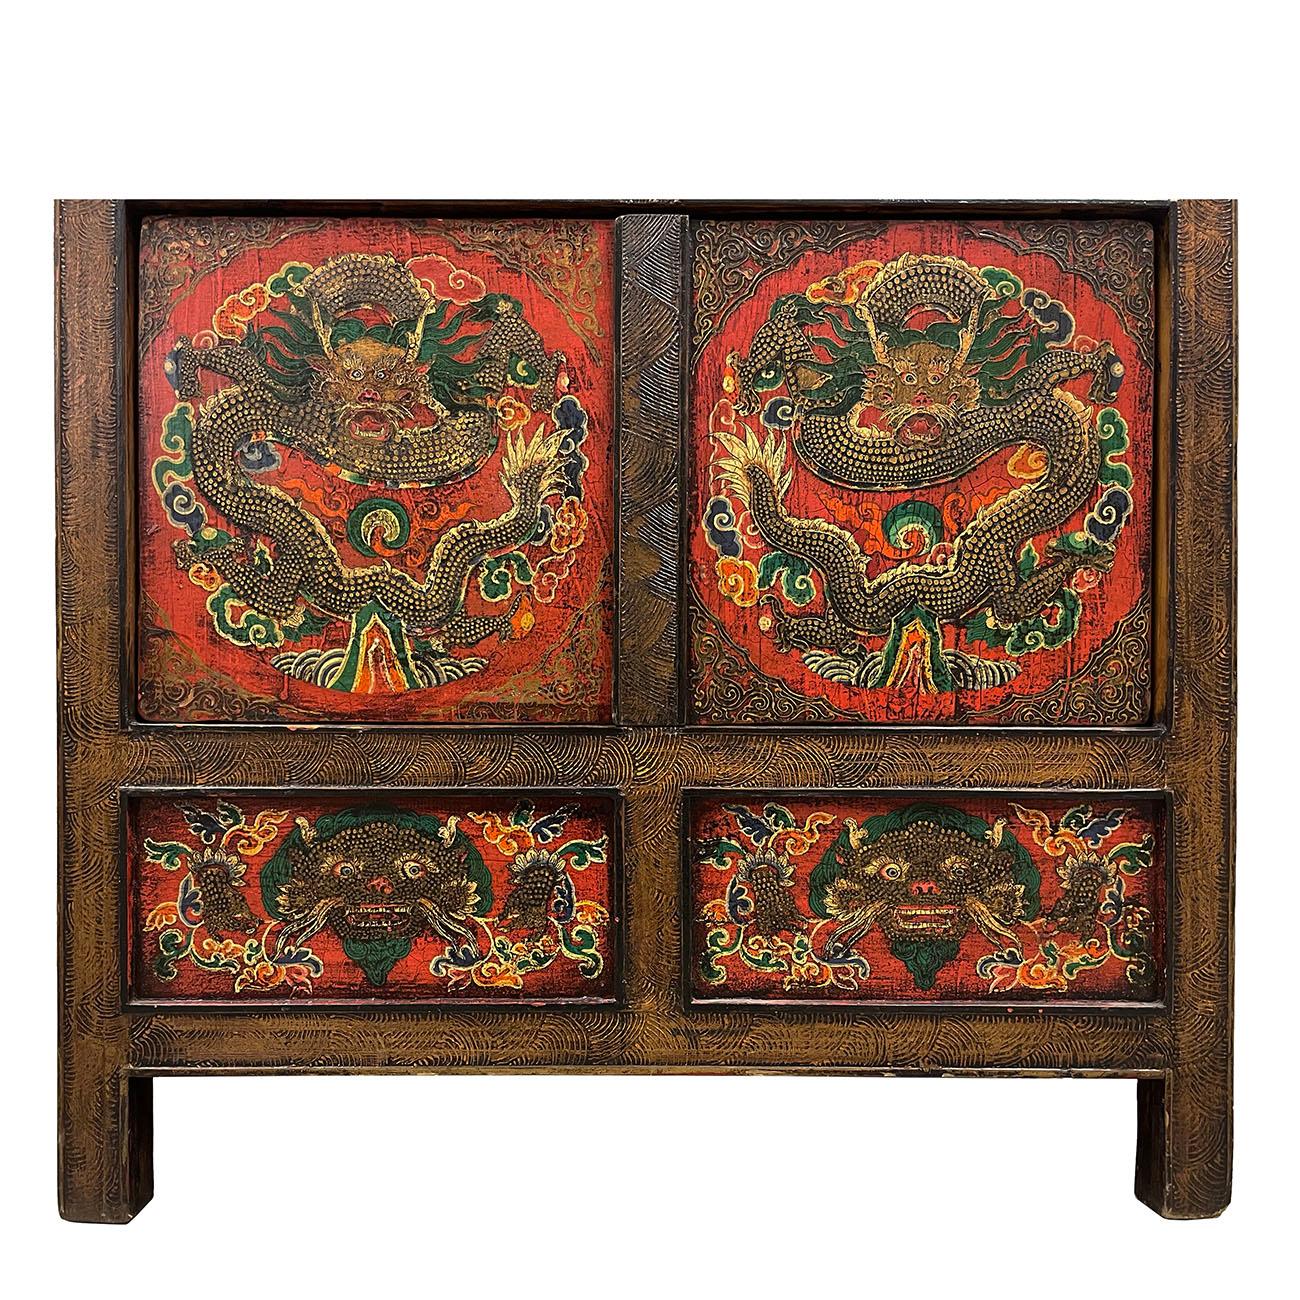 Early 20th Century Antique Tibetan Painted Dragon Tall Cabinet In Good Condition For Sale In Pomona, CA